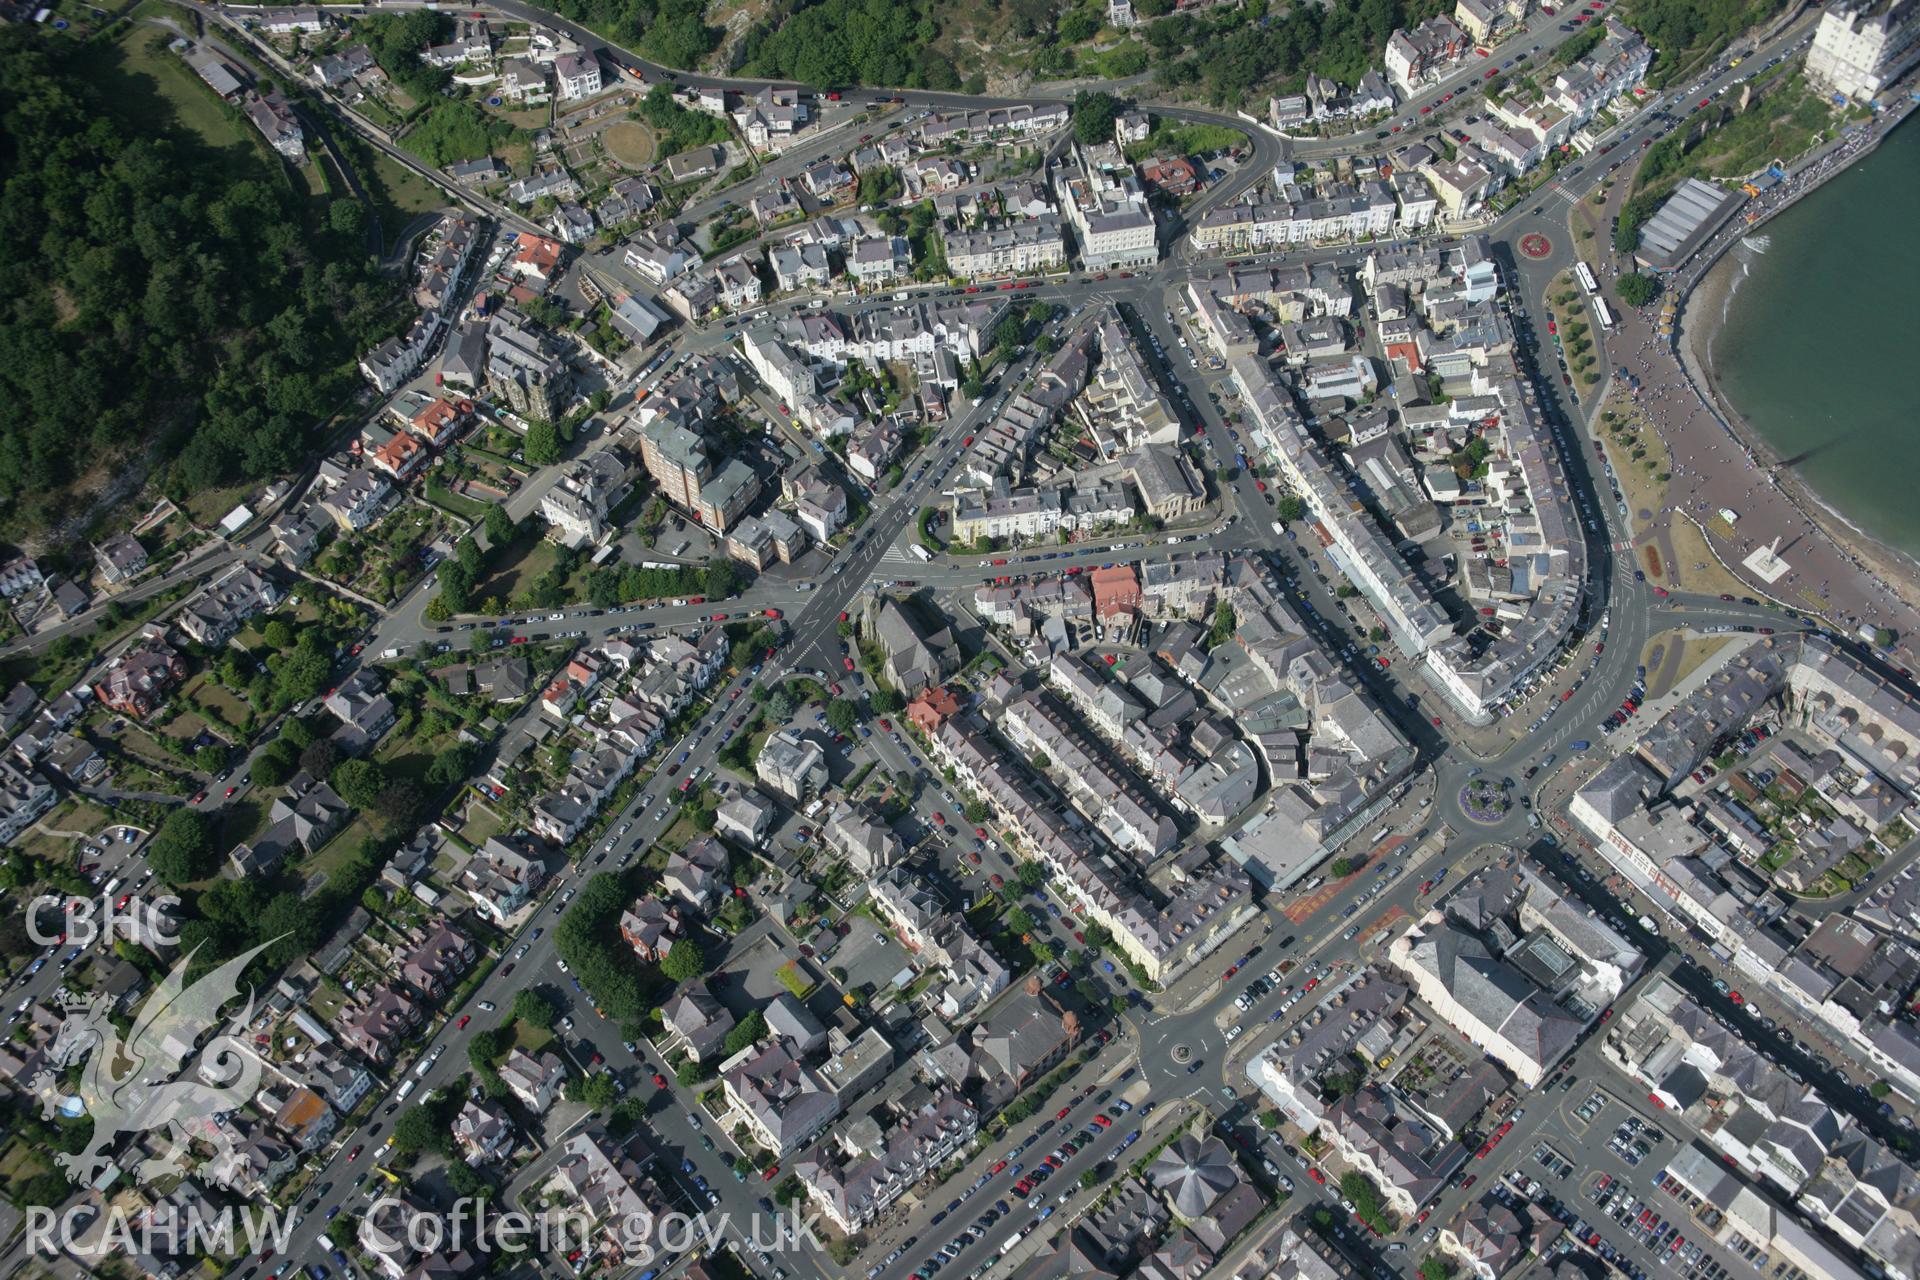 RCAHMW colour oblique aerial photograph of Llandudno. Taken on 14 August 2006 by Toby Driver.